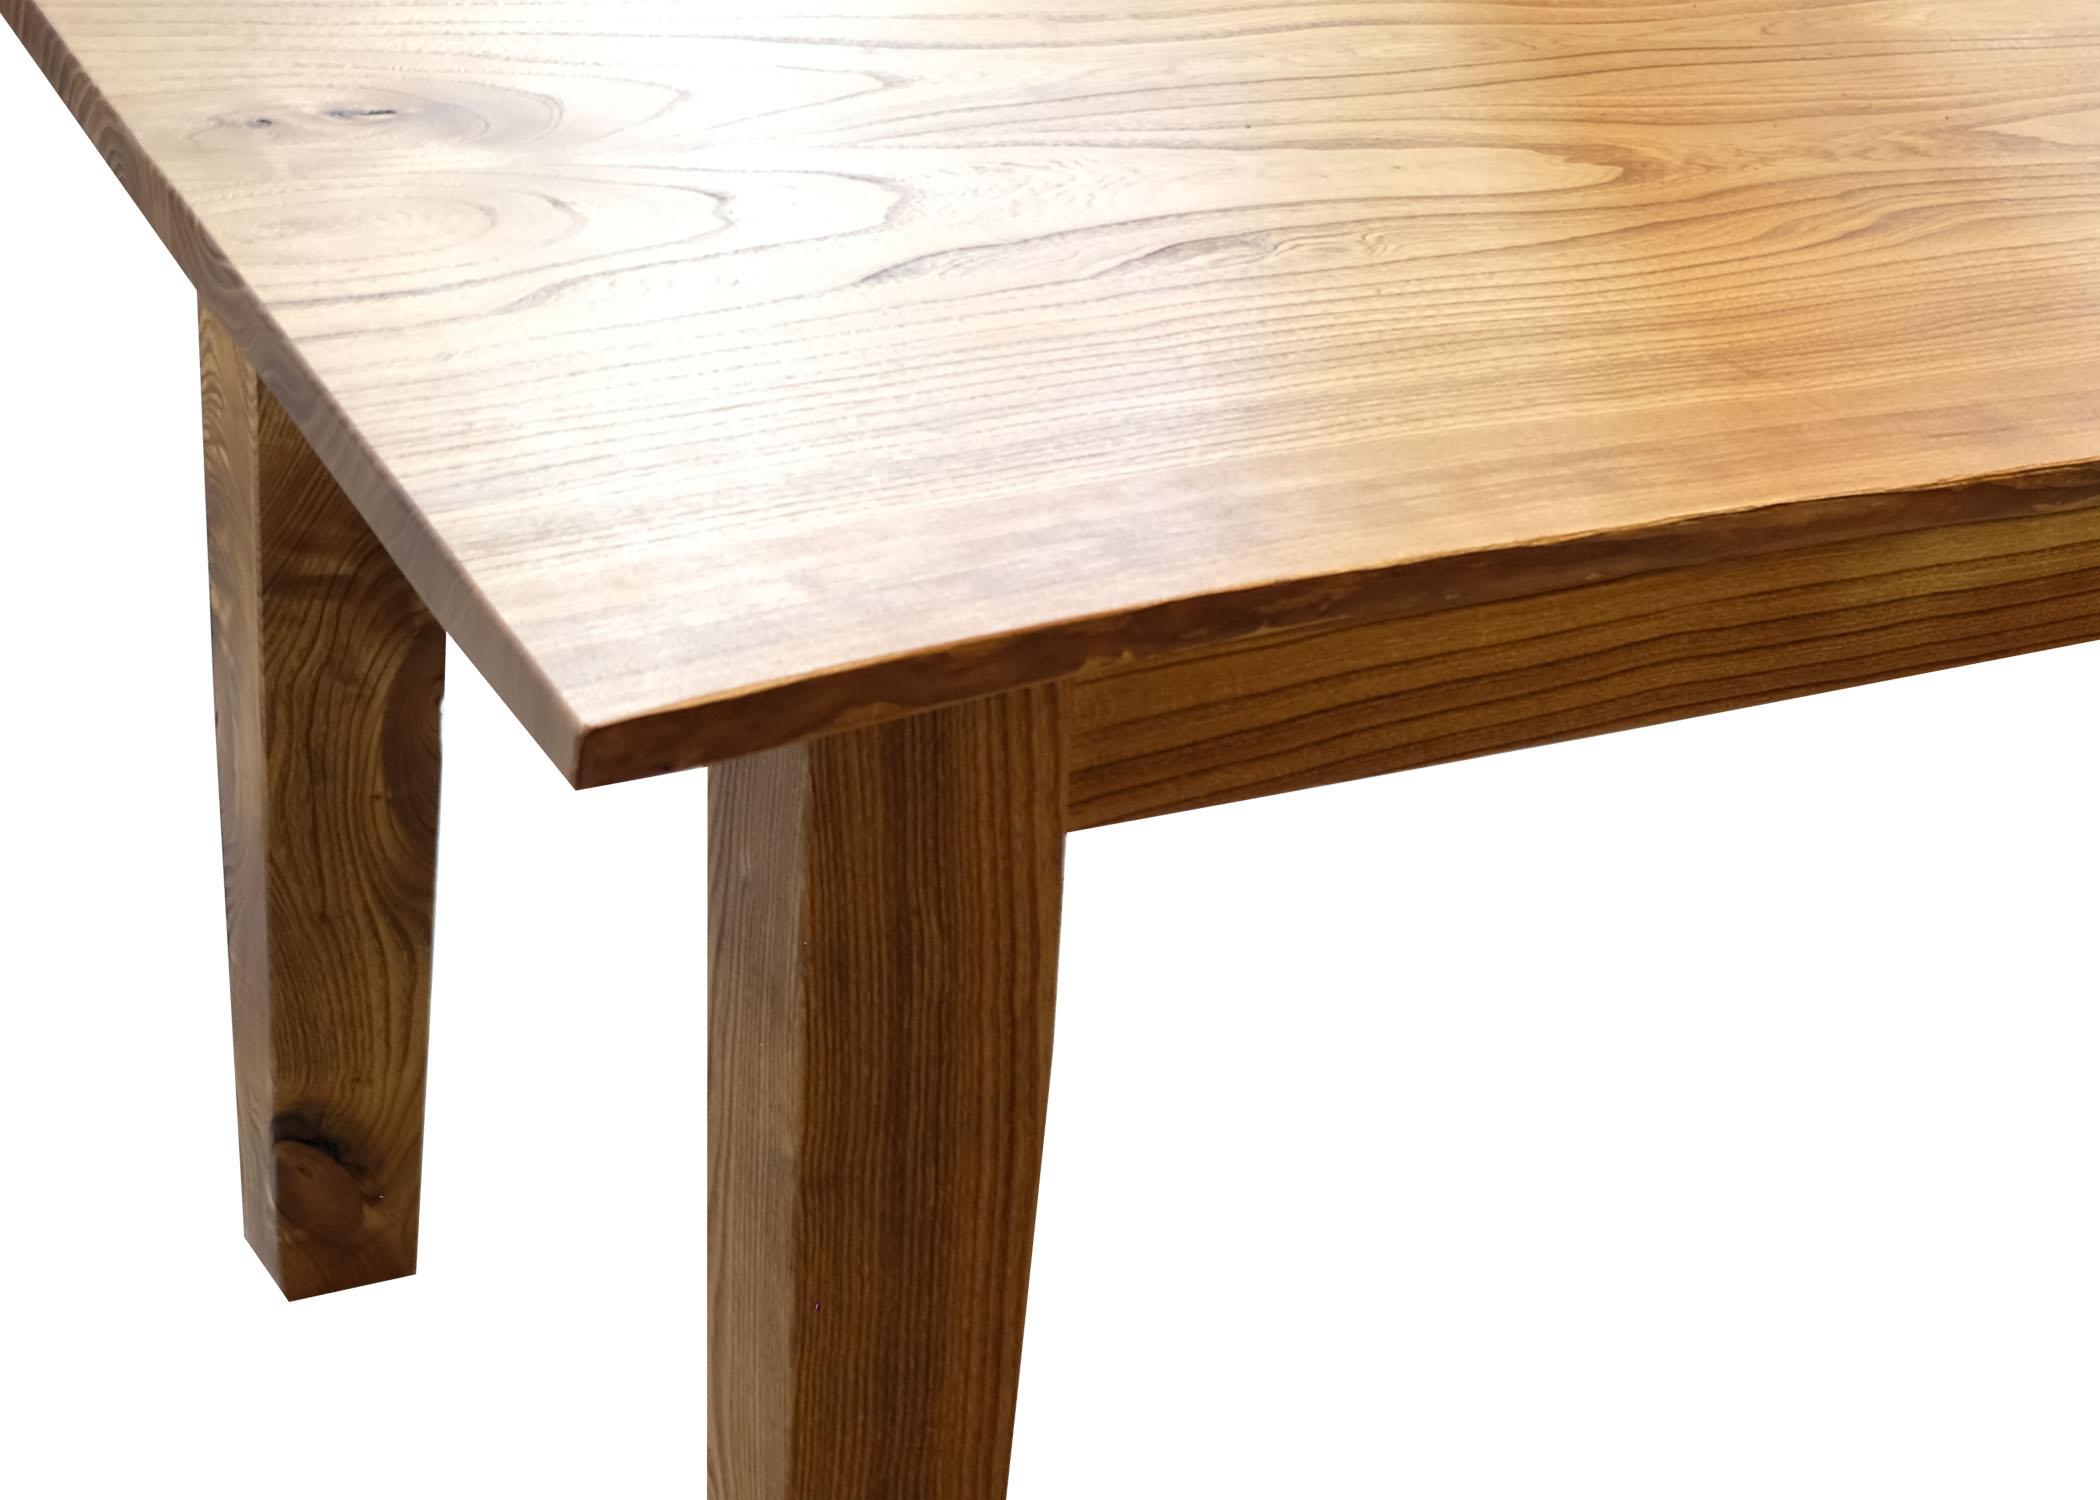 Beautiful catalpa young growth wire brushed textured grain dining table created by Master Craftsman Tim Hagen.